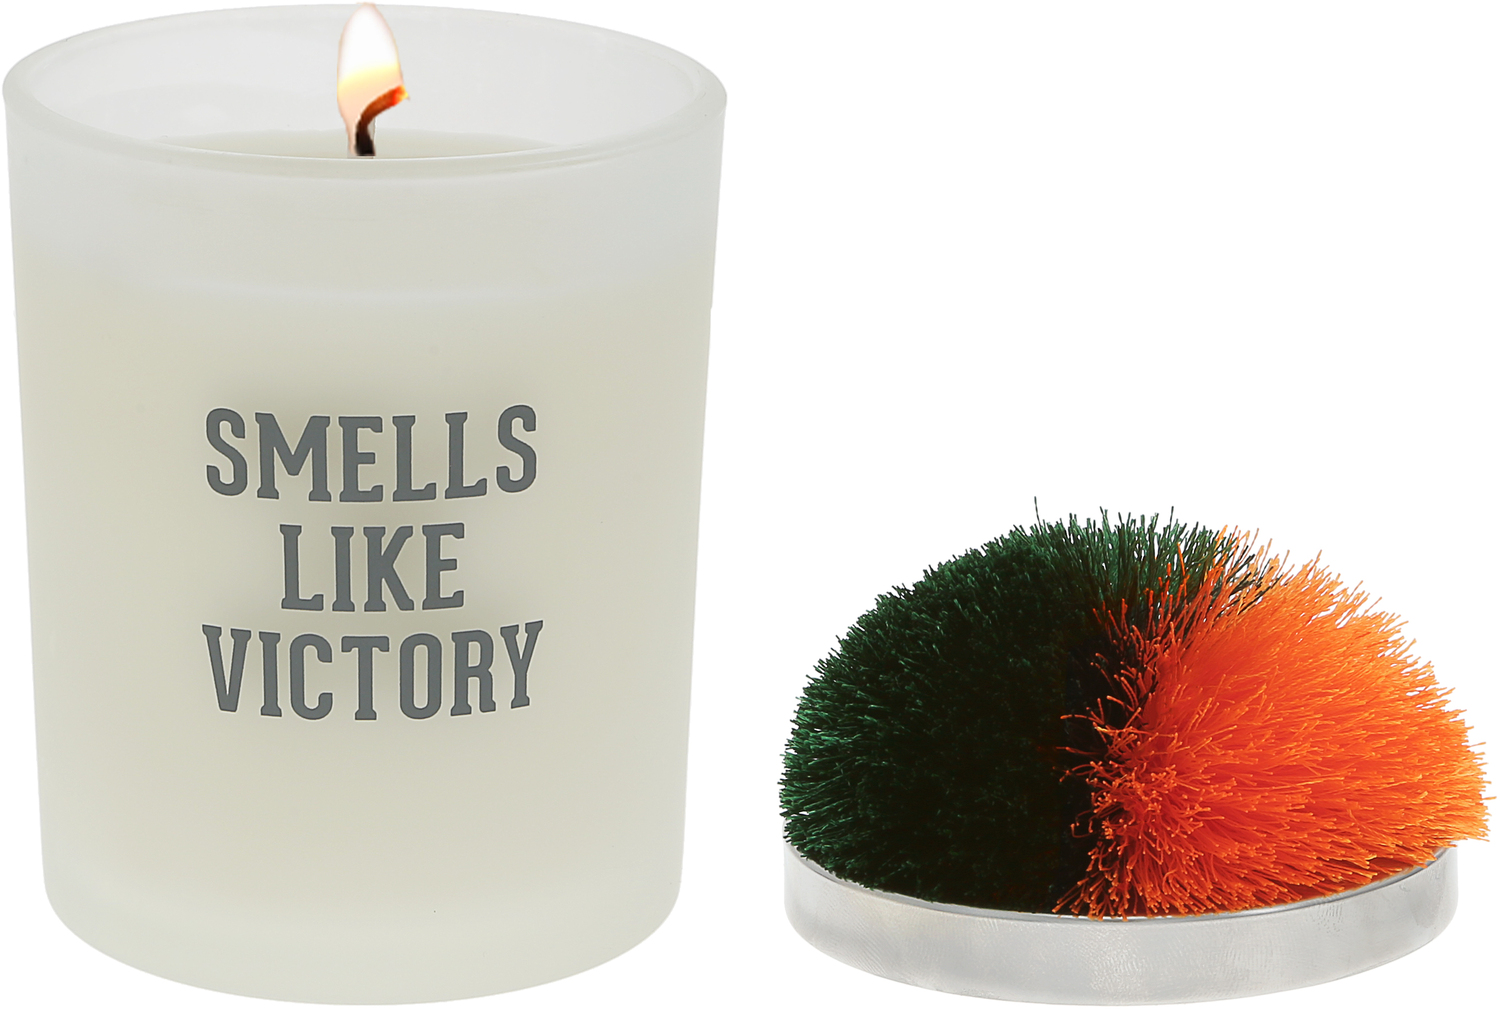 Victory - Green & Orange by Repre-Scent - Victory - Green & Orange - 5.5 oz - 100% Soy Wax Candle with Pom Pom Lid
Scent: Tranquility